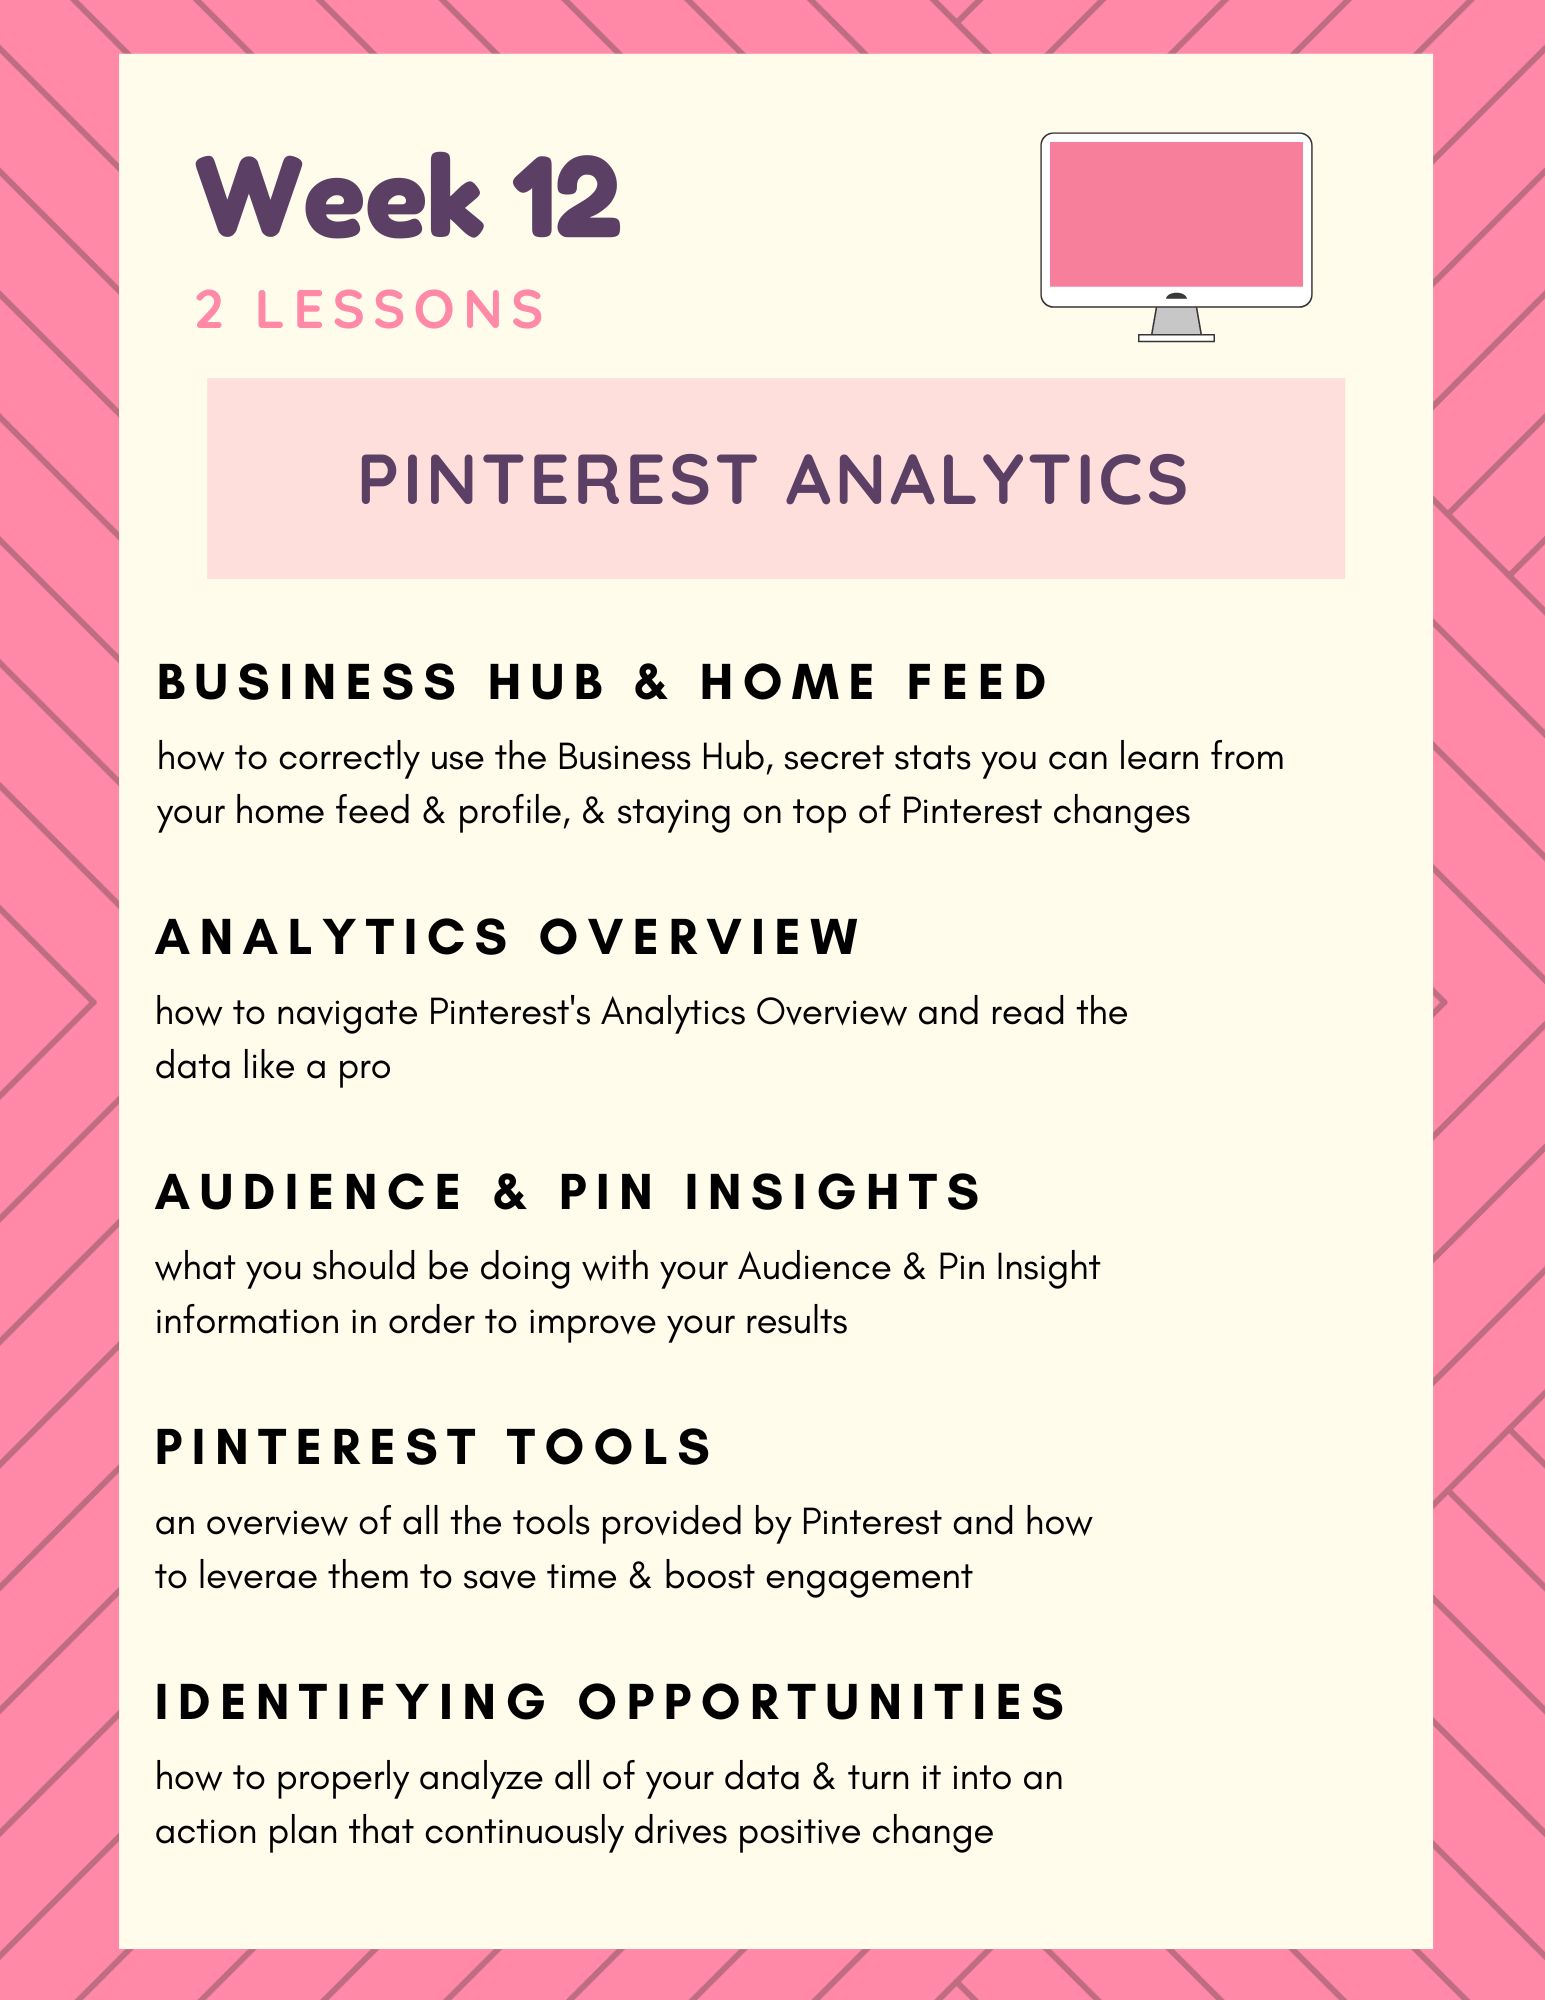 overview of week 12 course topic - pinterest analytics